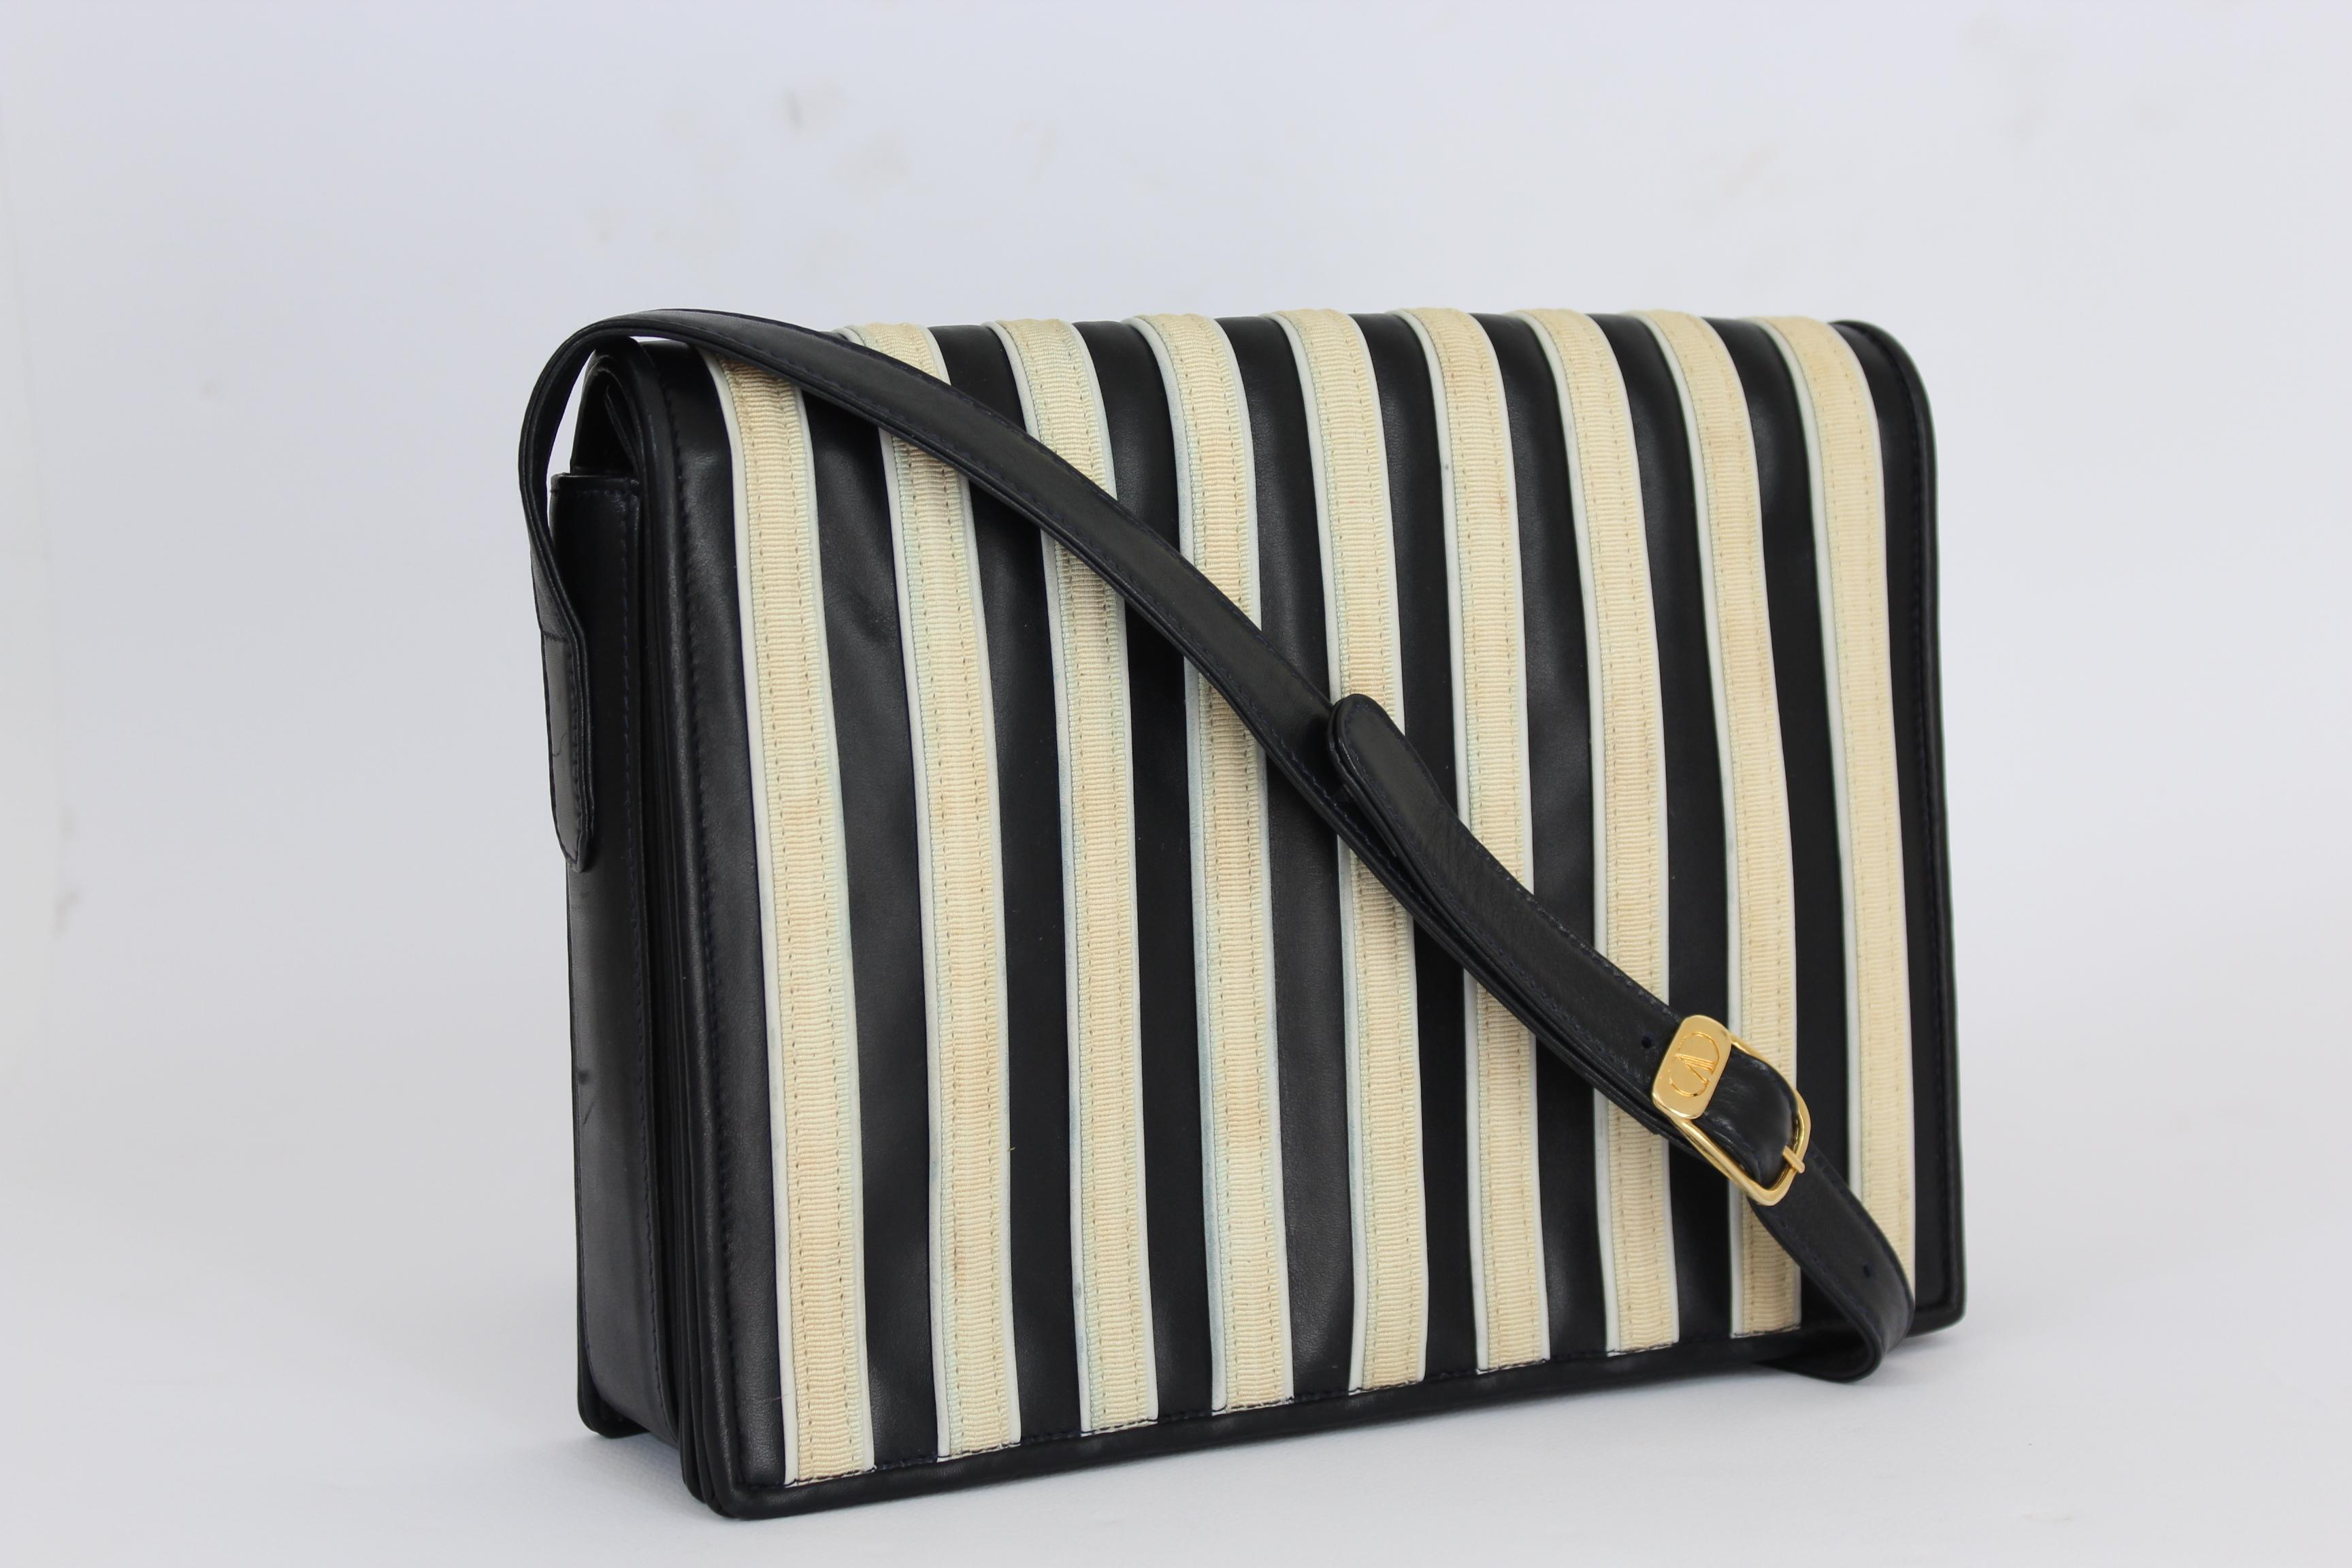 Valentino Garavani Les Sacs vintage 80s bag. Shoulder bag, black with beige stripes. 100% leather. Internal dividers, clip button closure. Adjustable shoulder strap. Made in Italy. Very good vintage condition, some signs of aging in the beige parts,